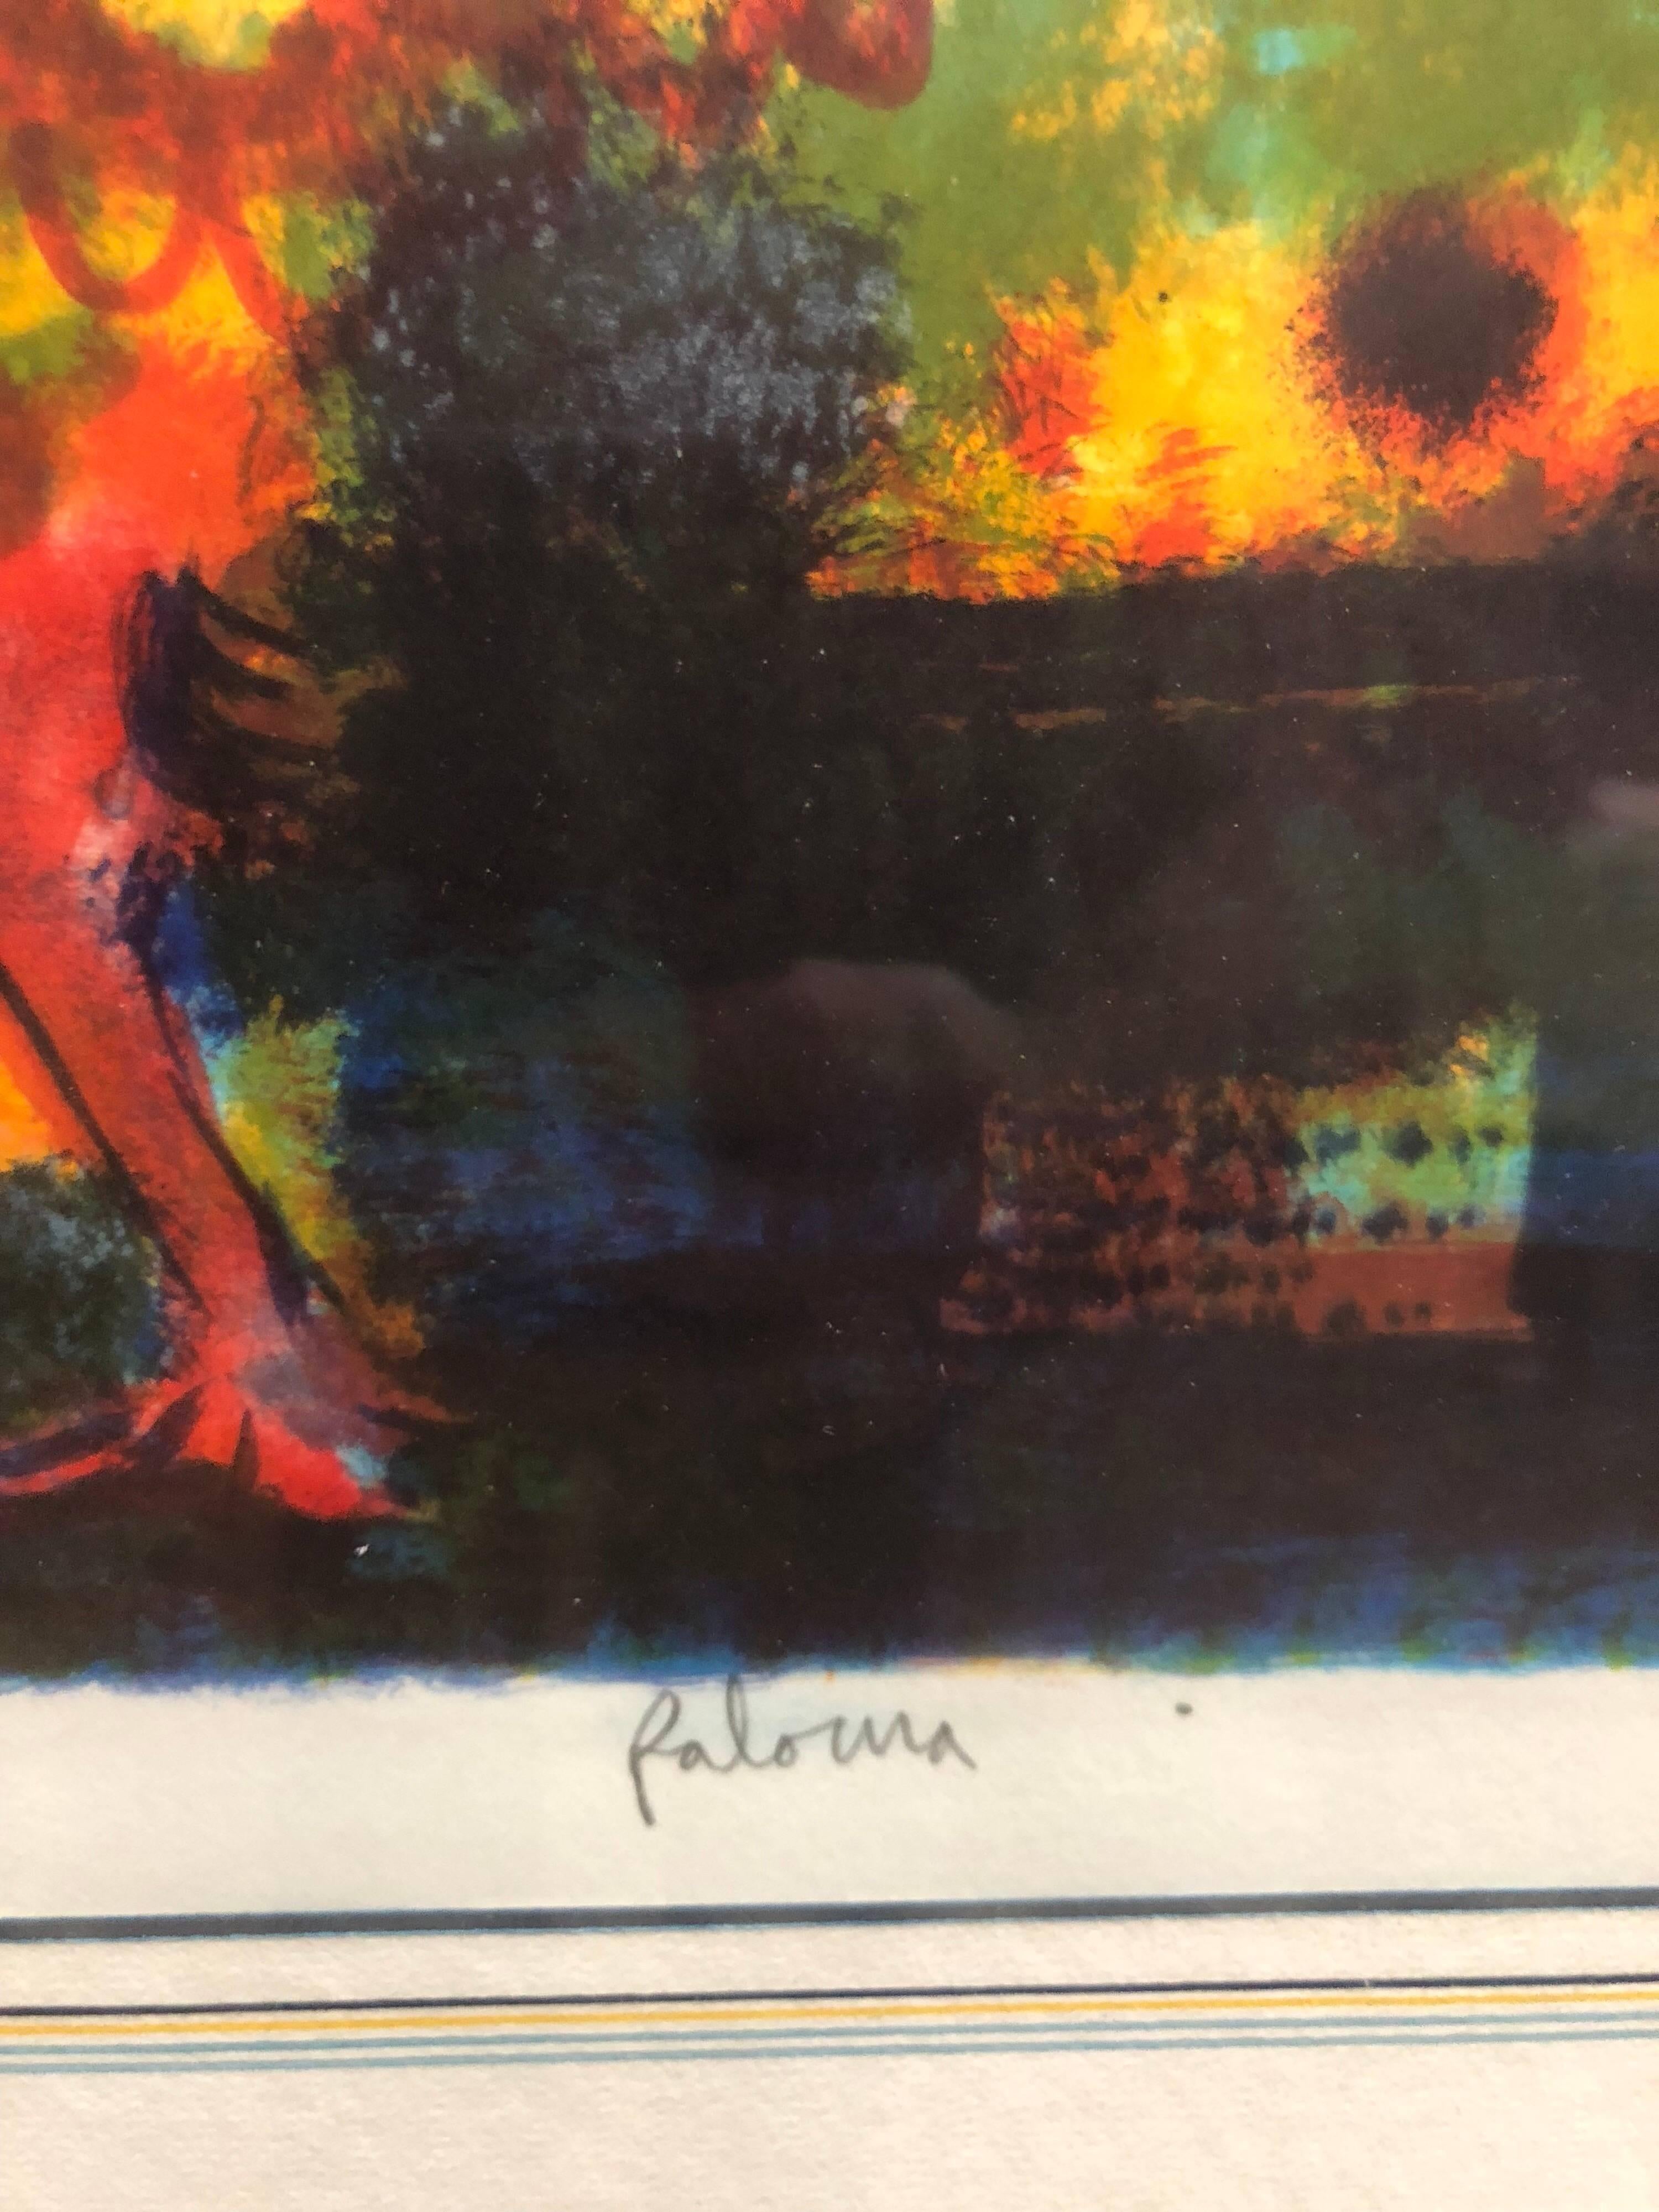 Spanish Modernist 'Paloma' Colorful Lithograph of a Bird For Sale 1